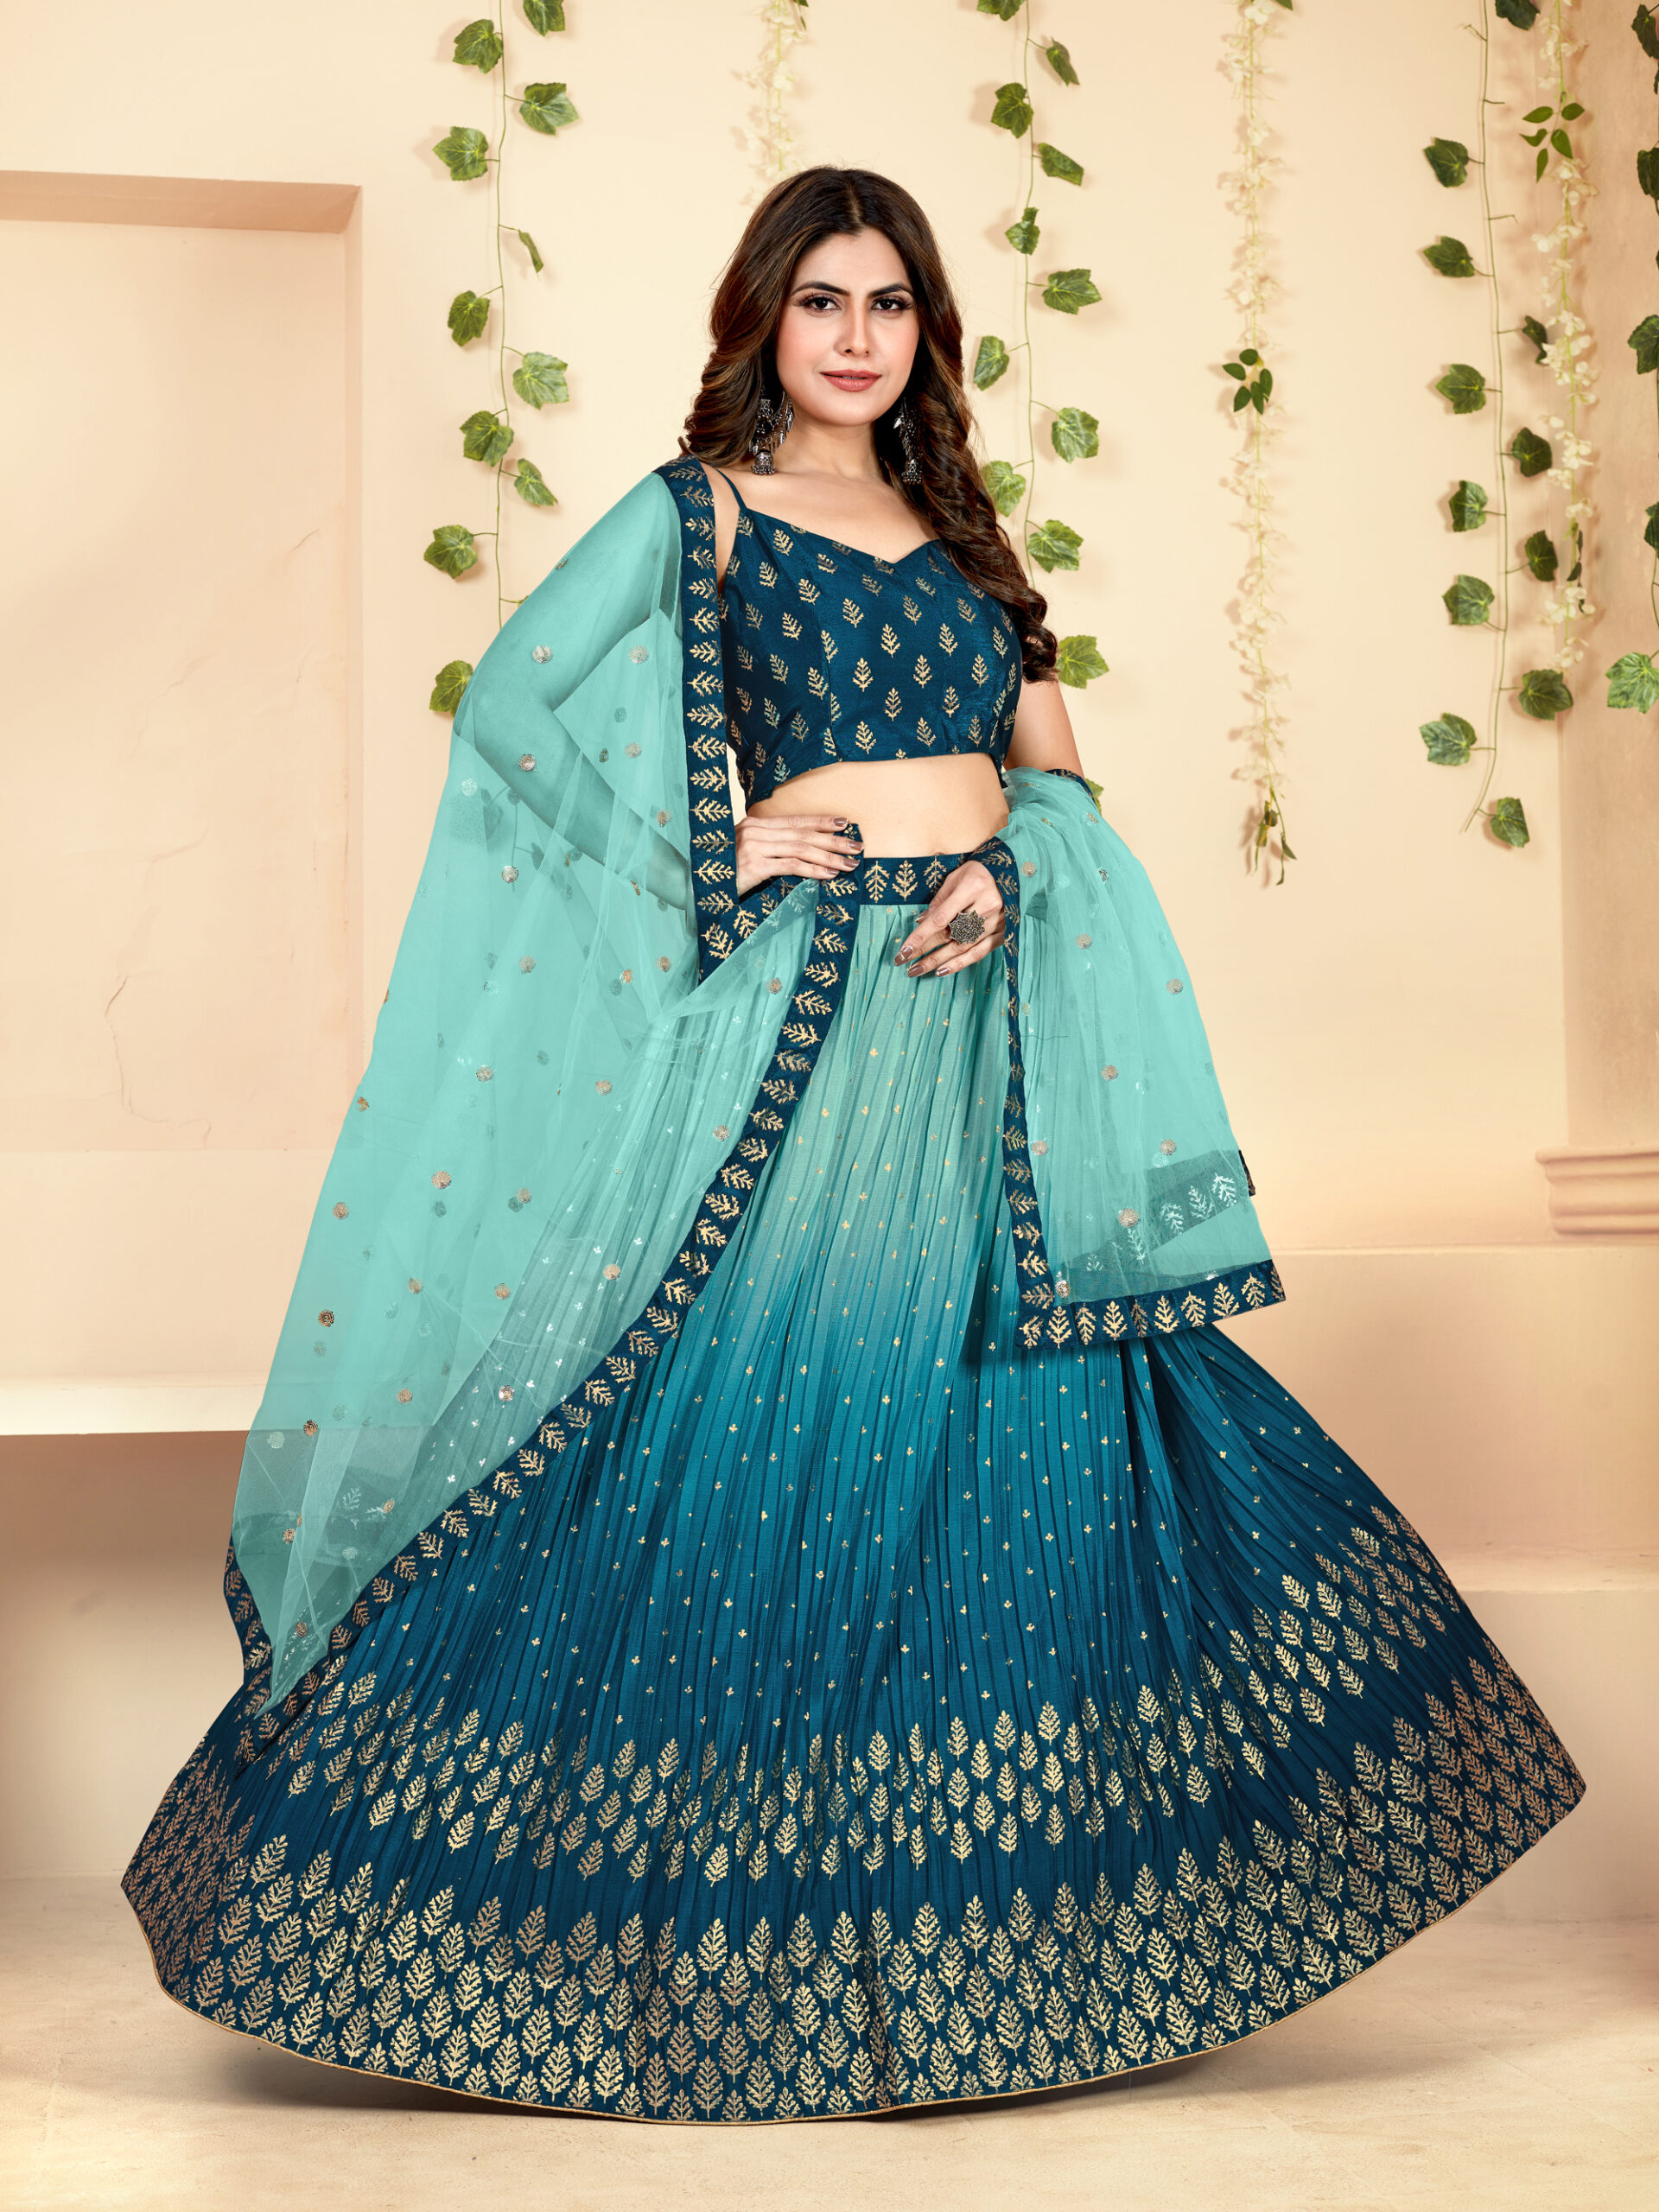 Embroidered Velvet Lehenga in Shaded Peach and Teal Blue : LNJ474